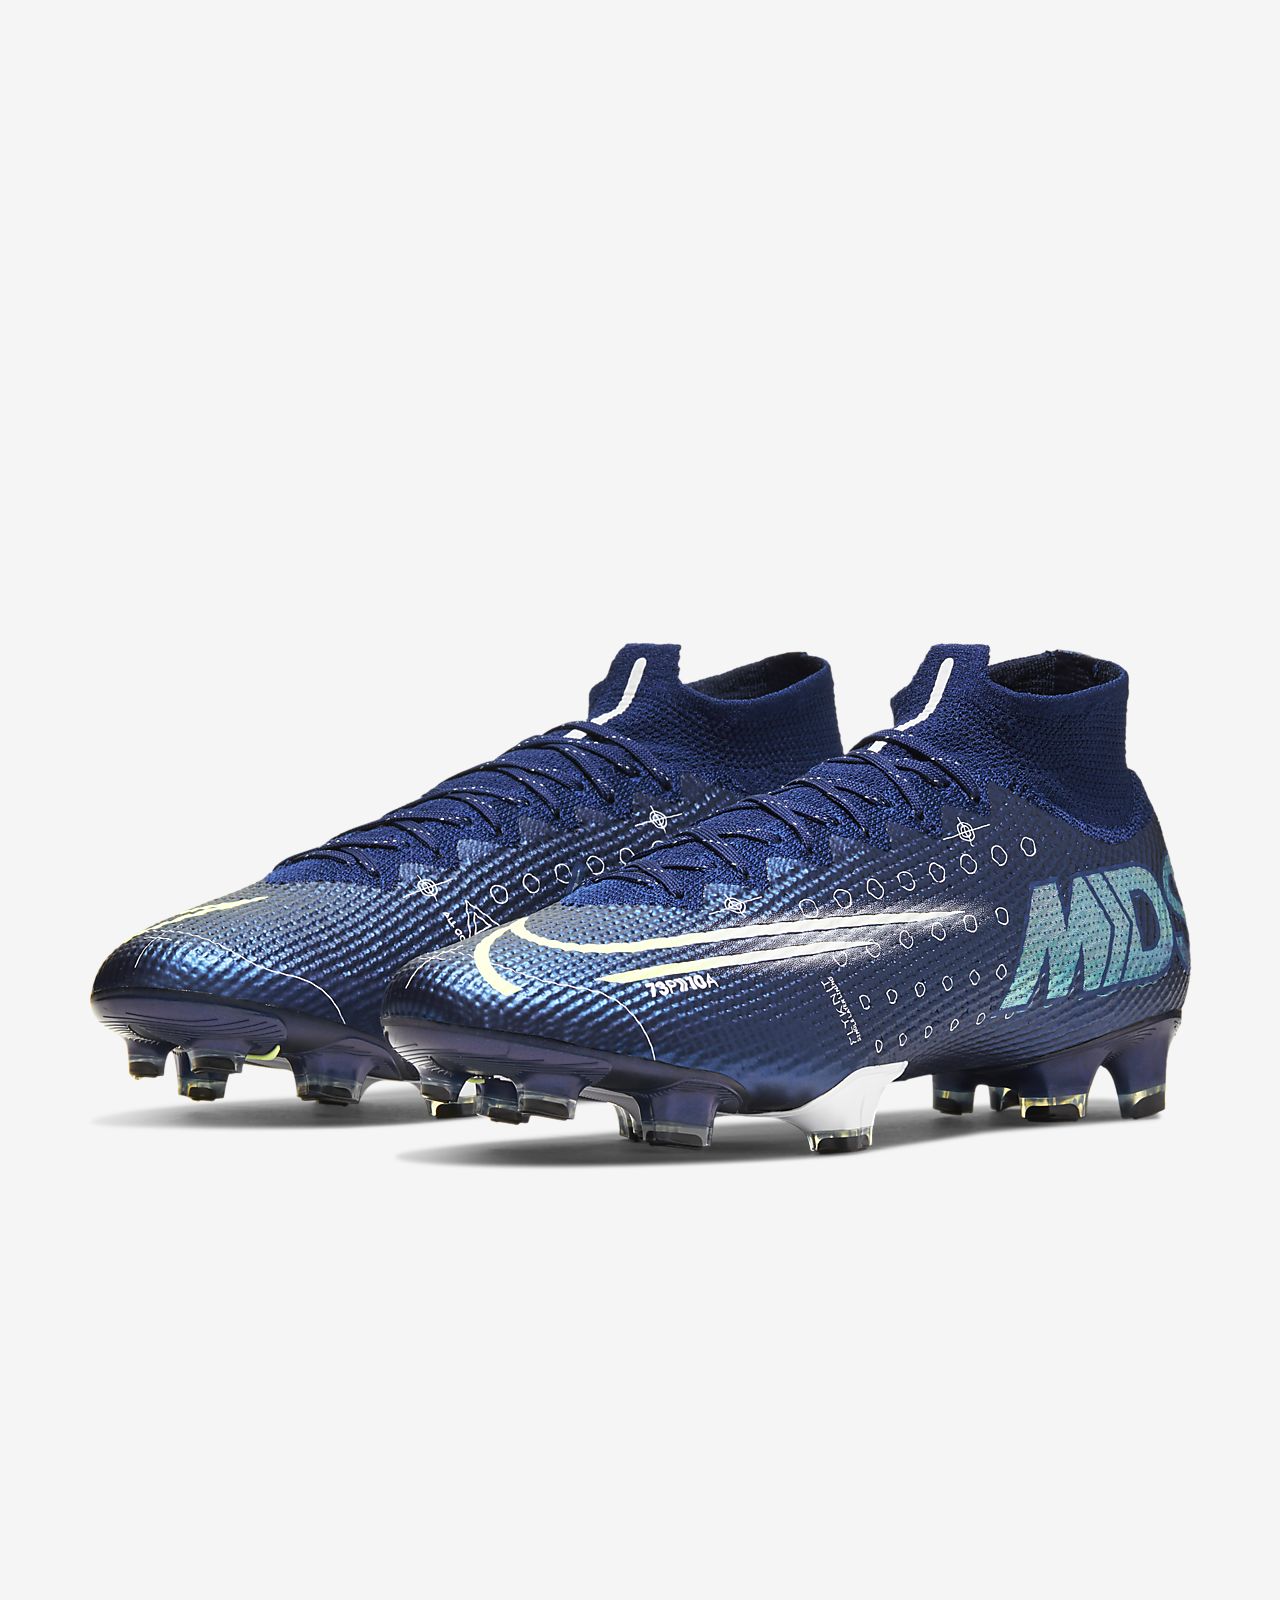 nike mercurial new boots